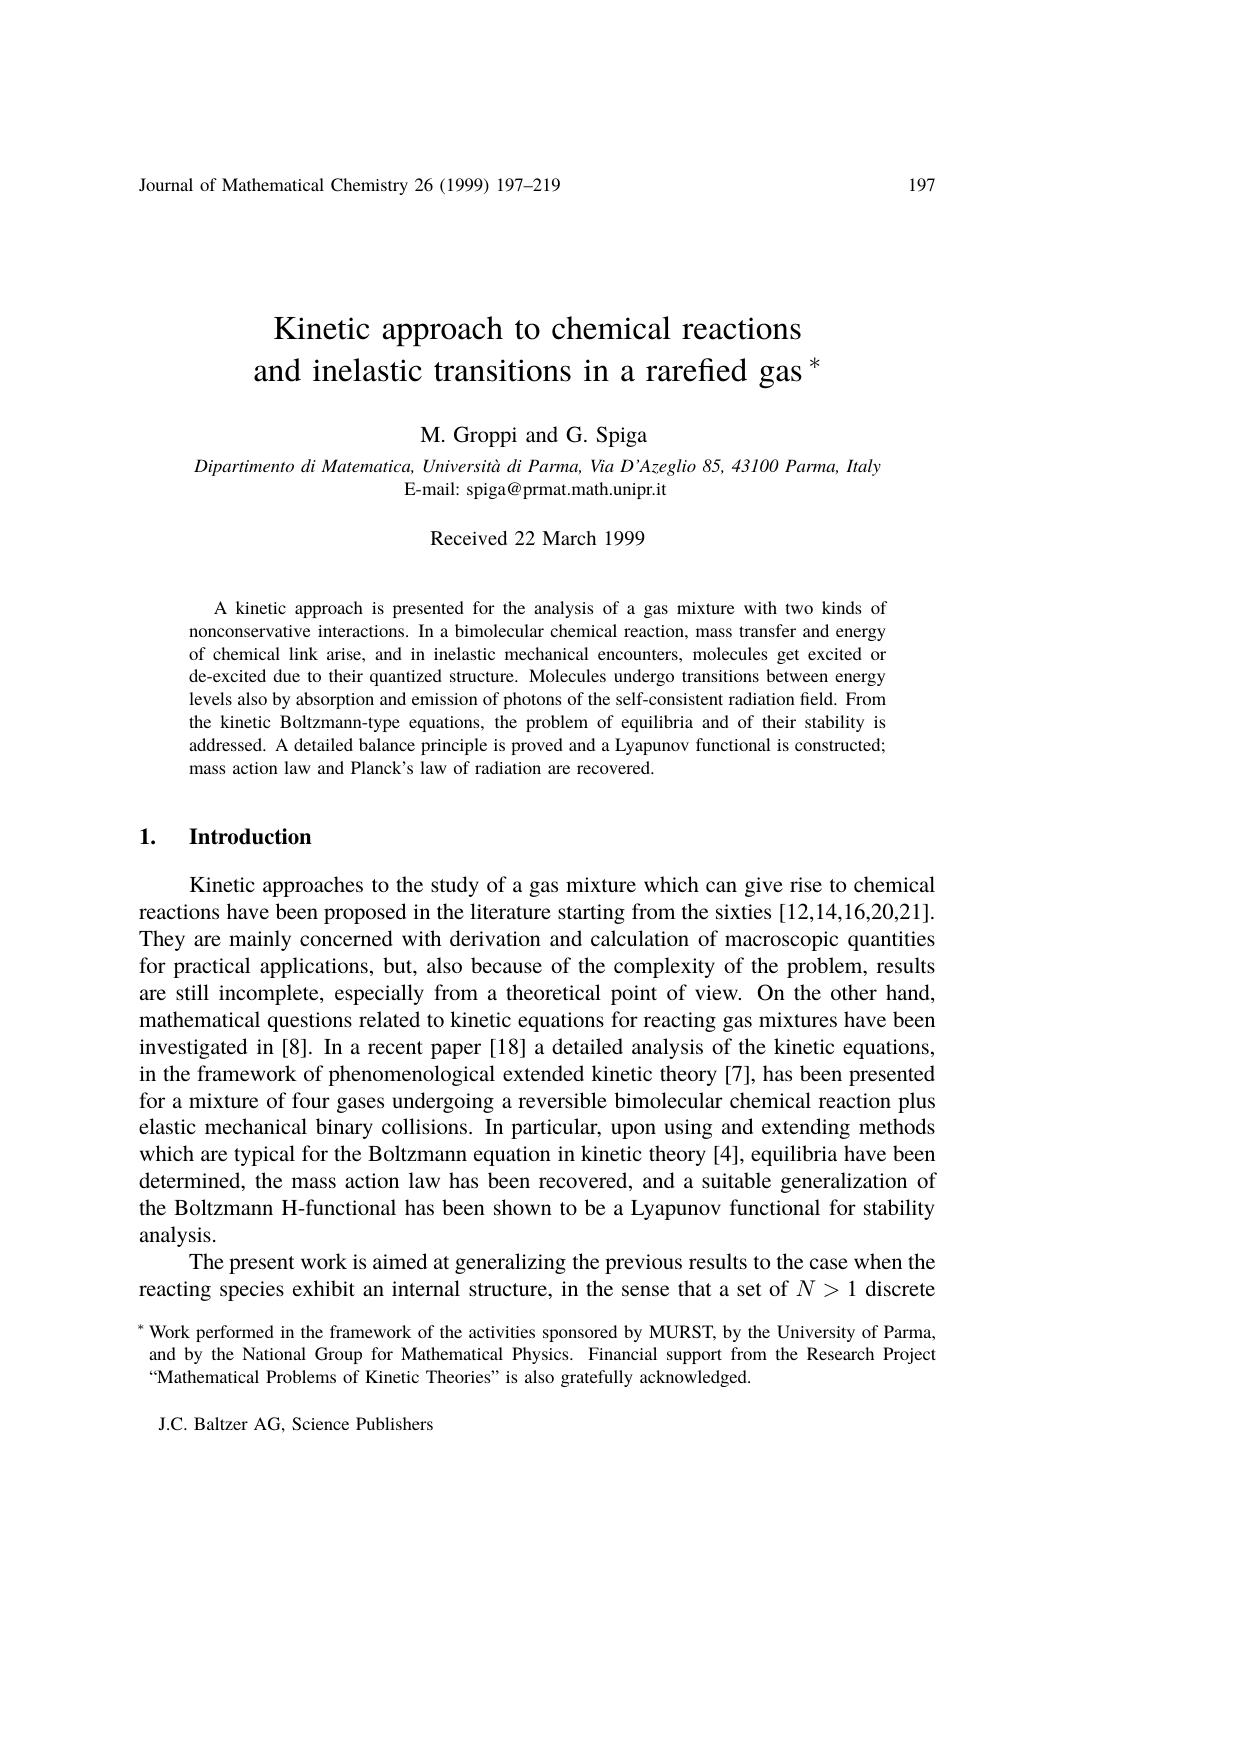 Kinetic approach to chemical reactions and inelastic transitions in a rarefied gas by Unknown